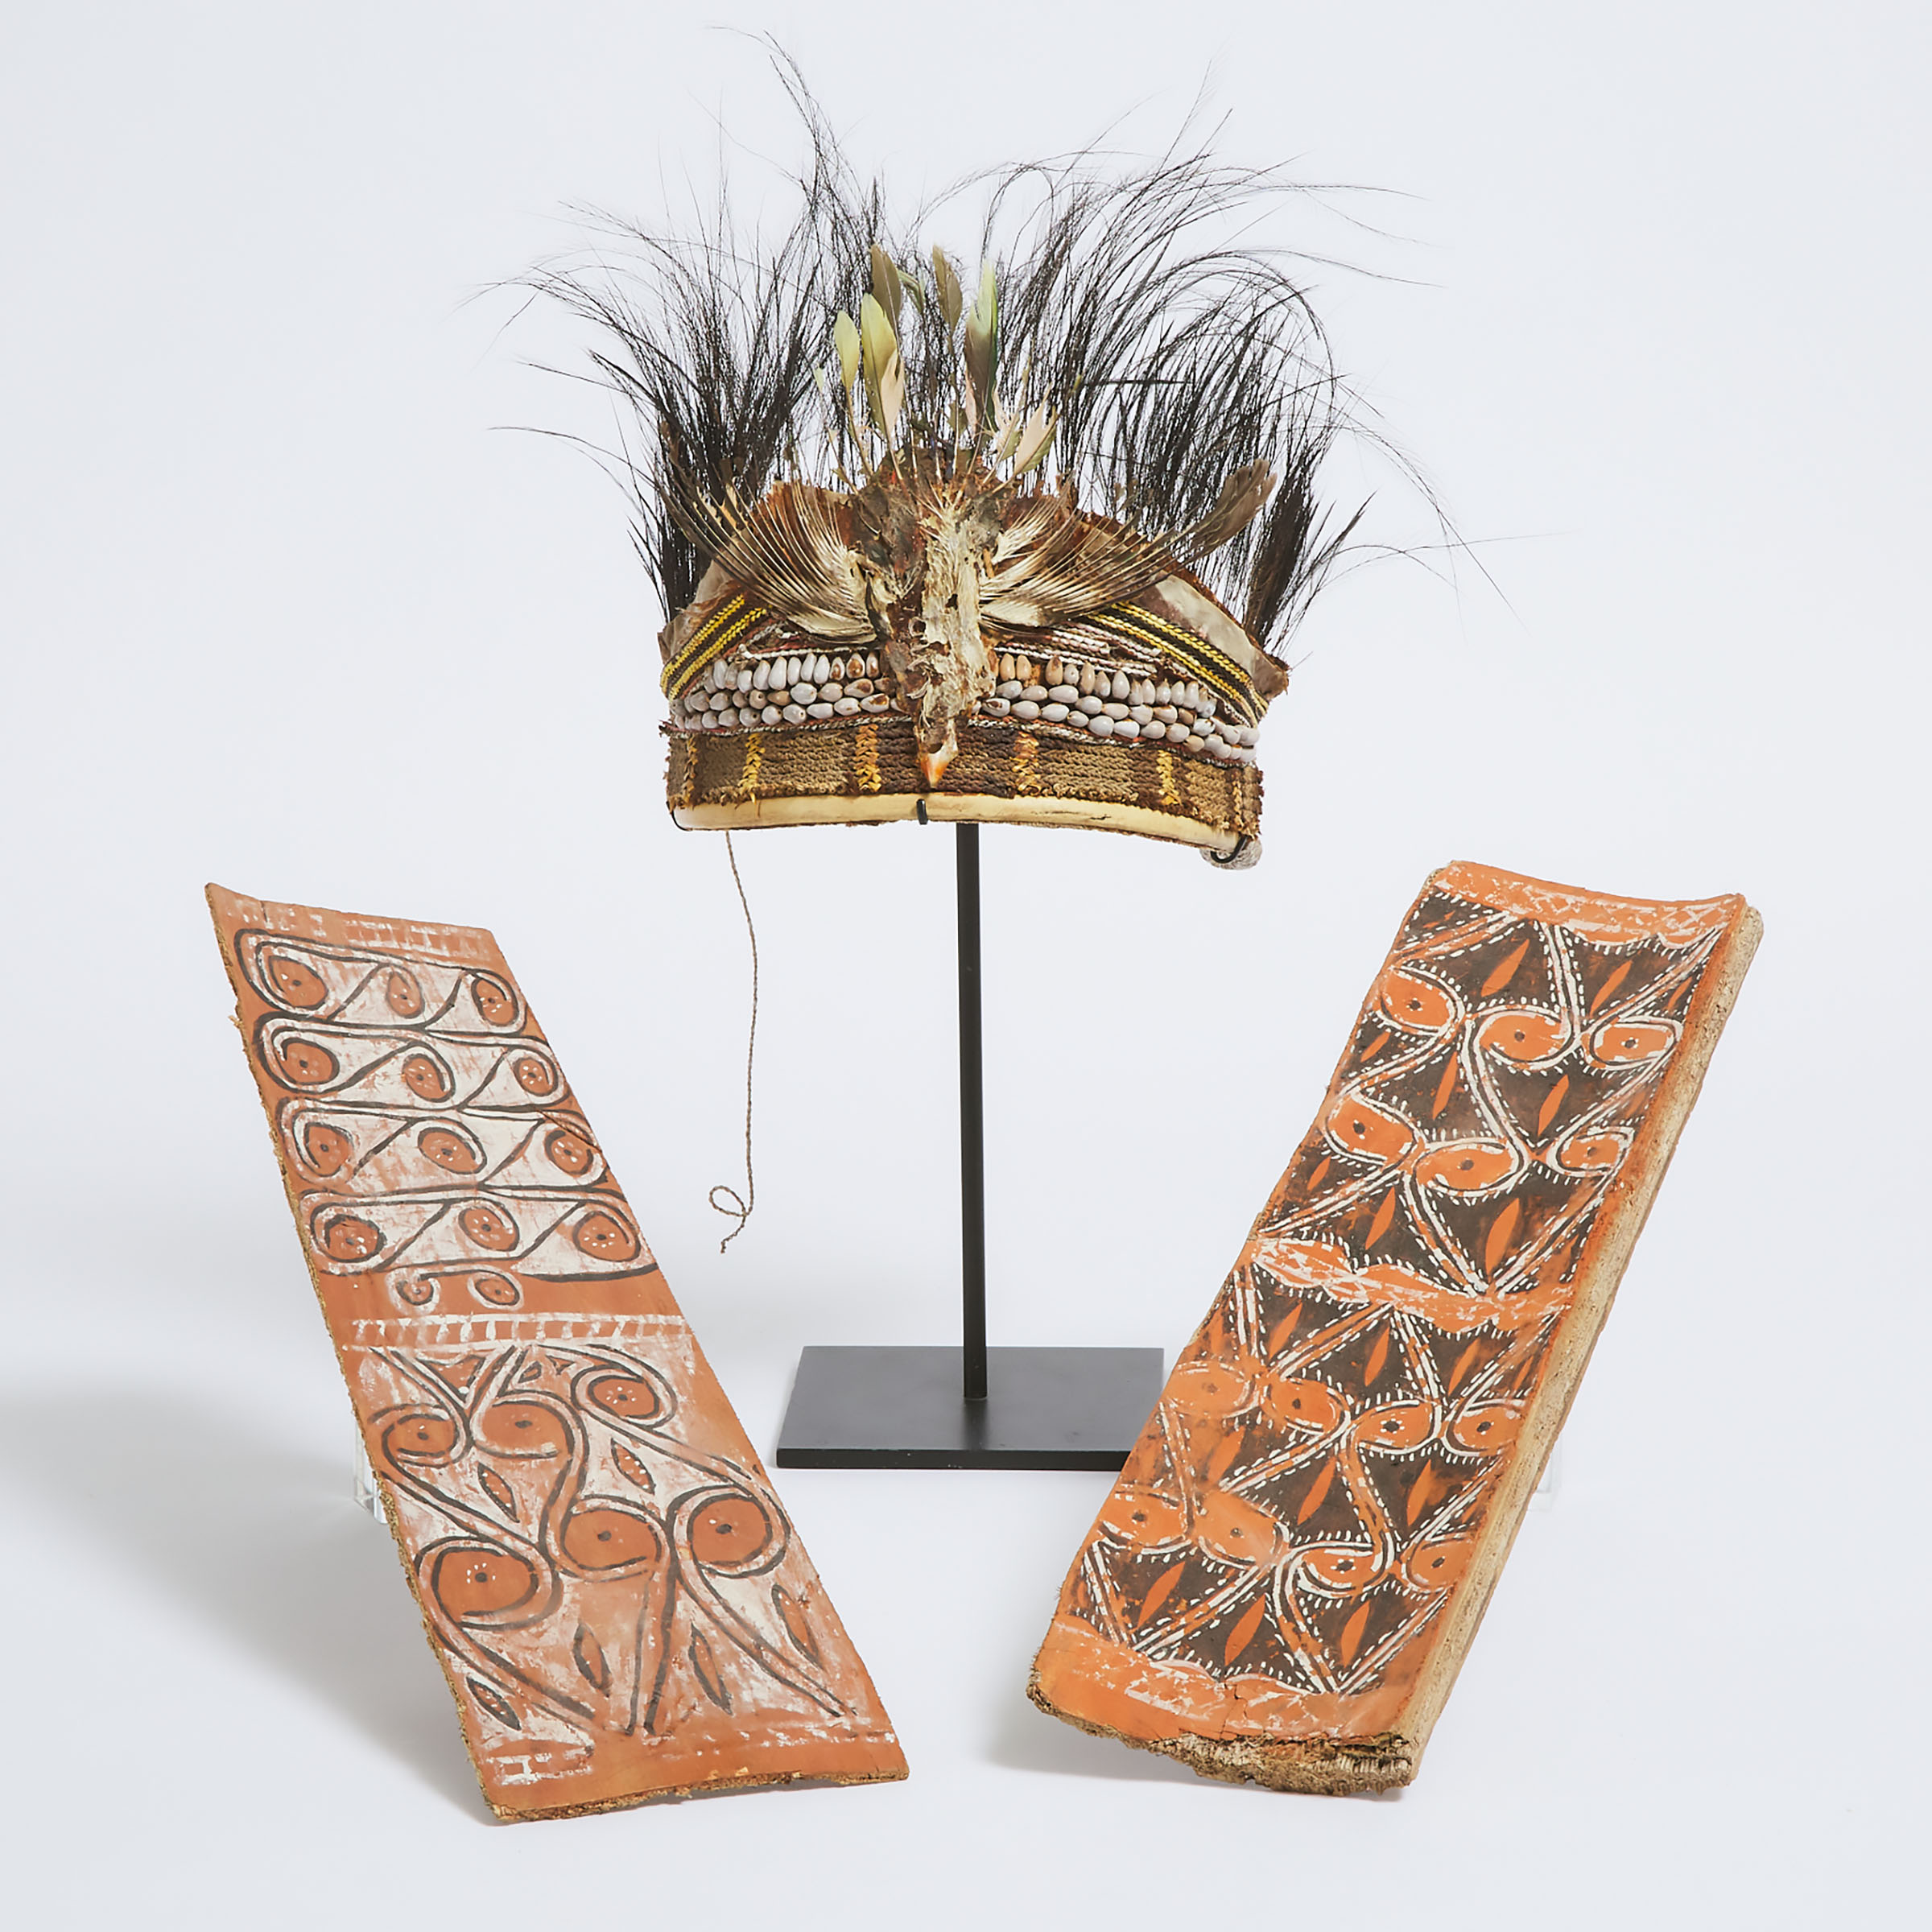 Papua New Guinea Headdress together with Two Painted Bark House Tiles, 20th century